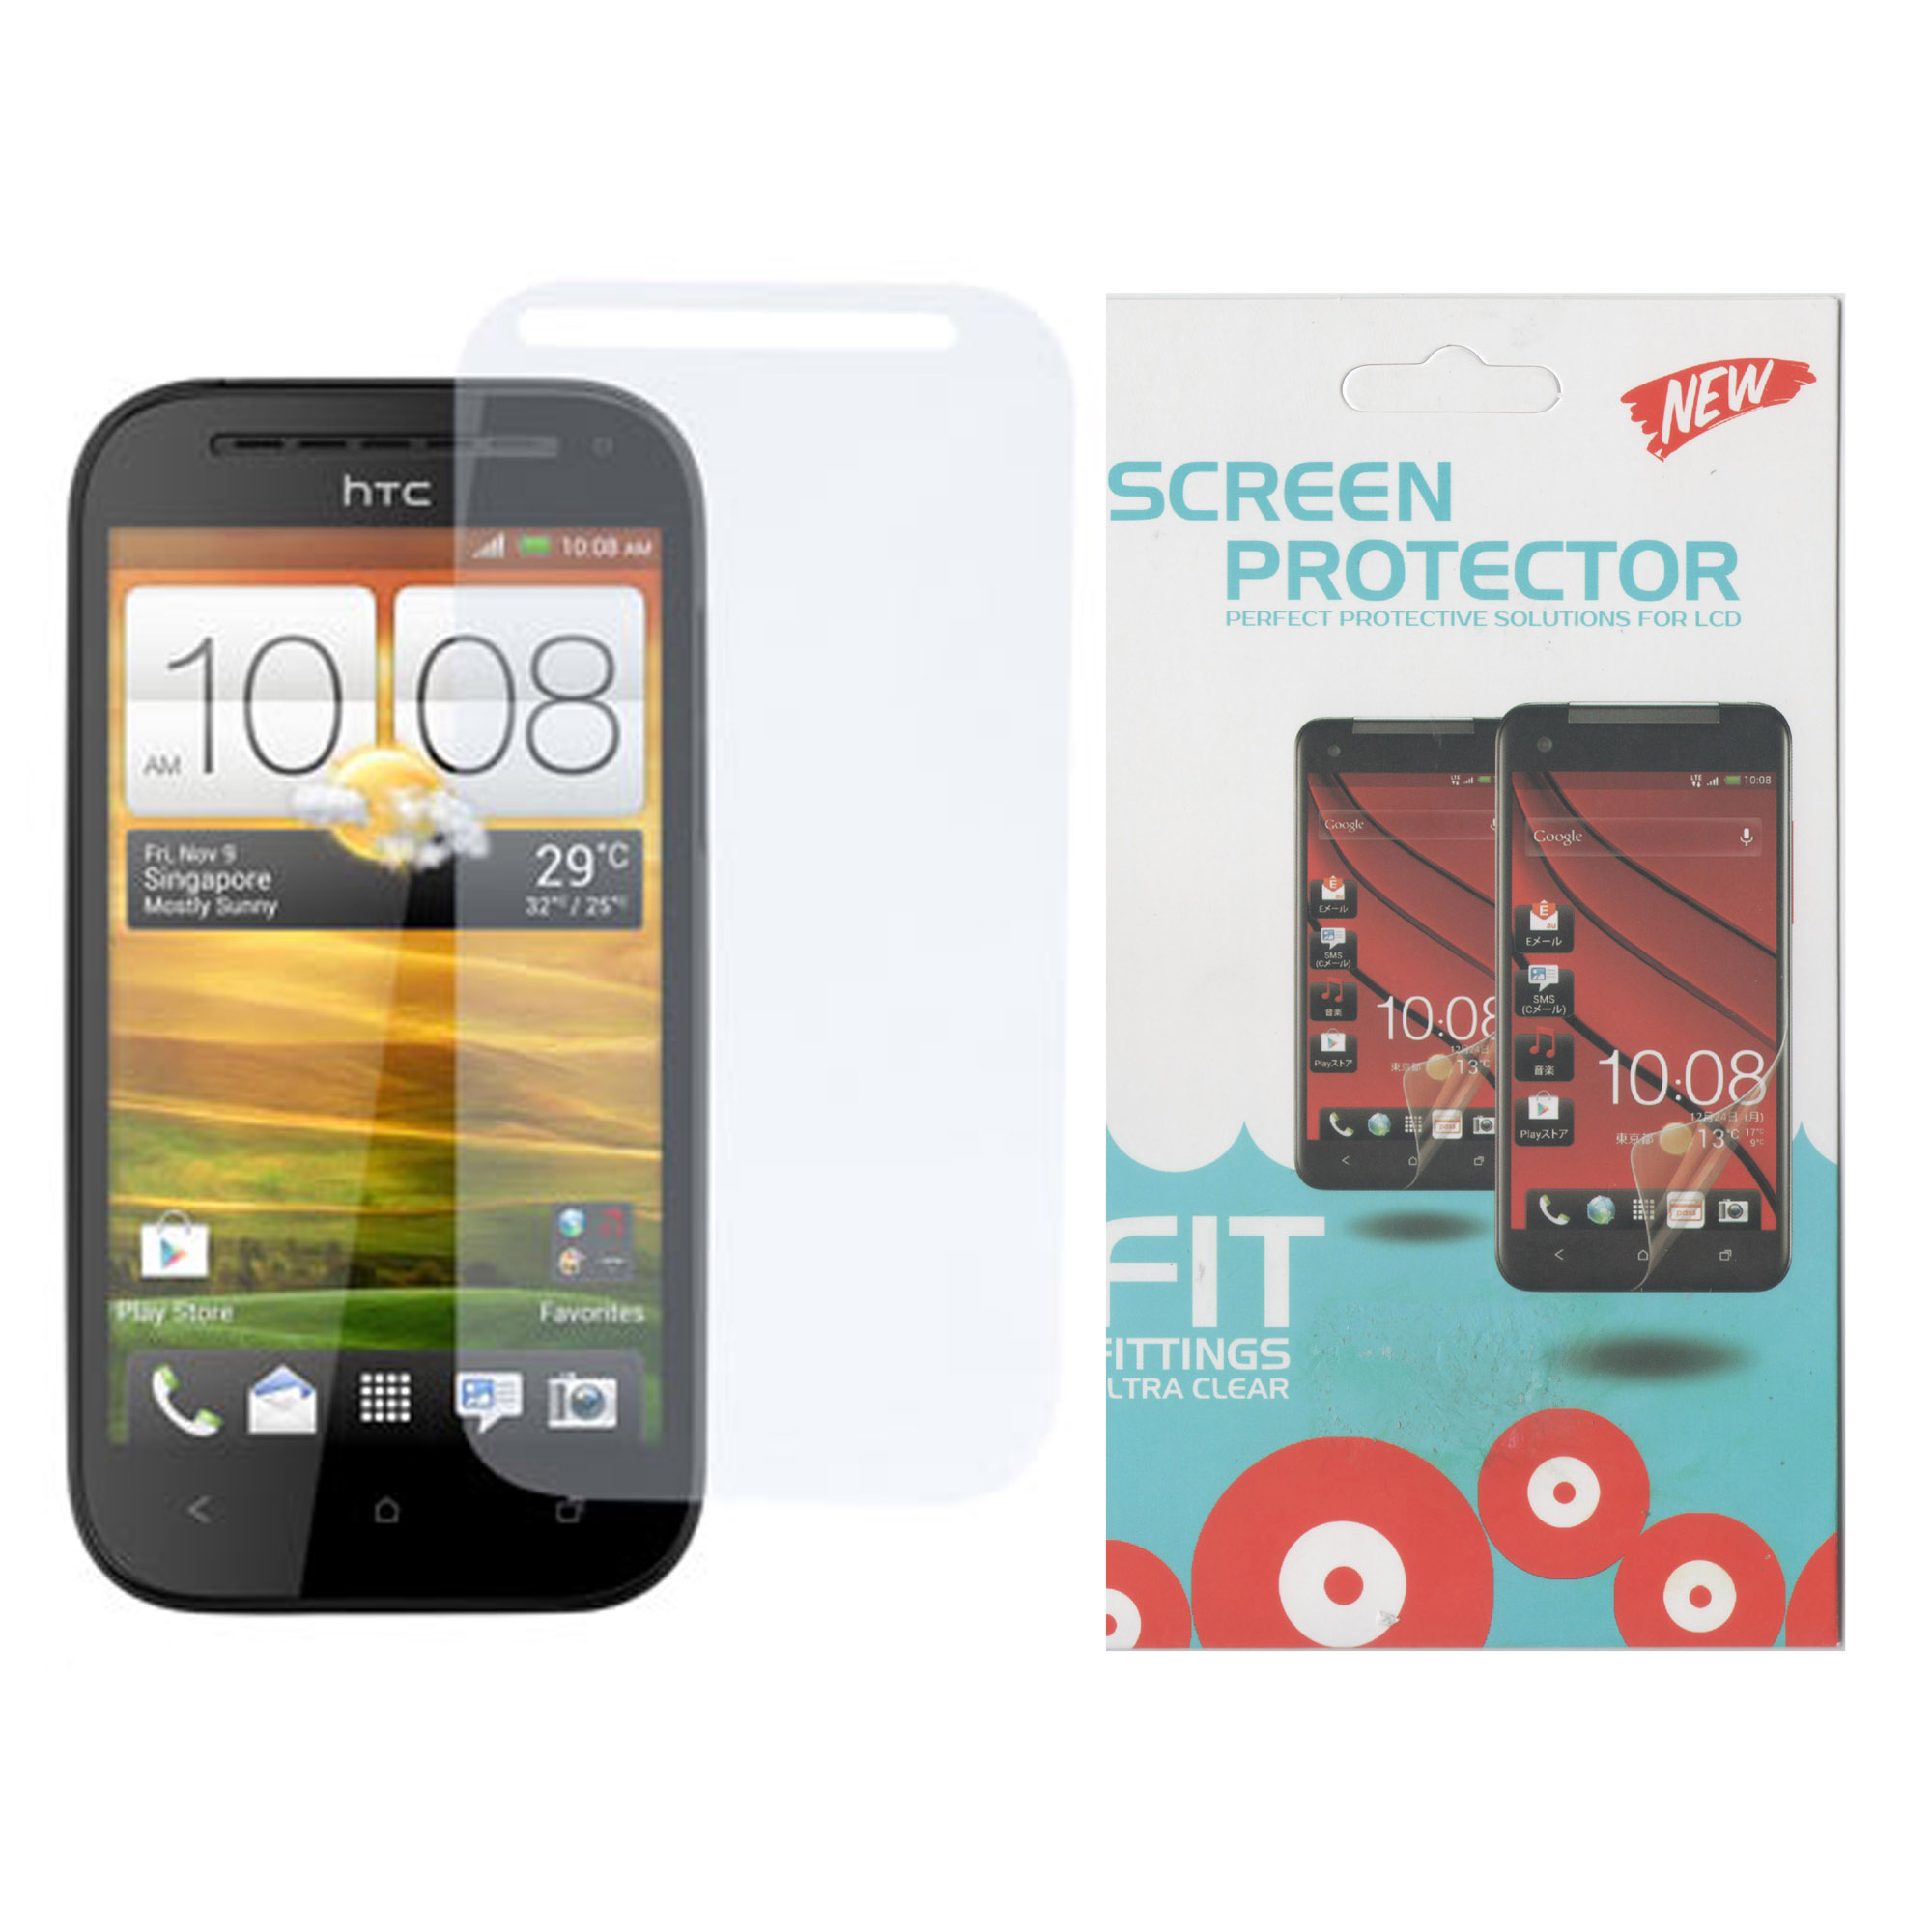 Screen proector for HTC One SV